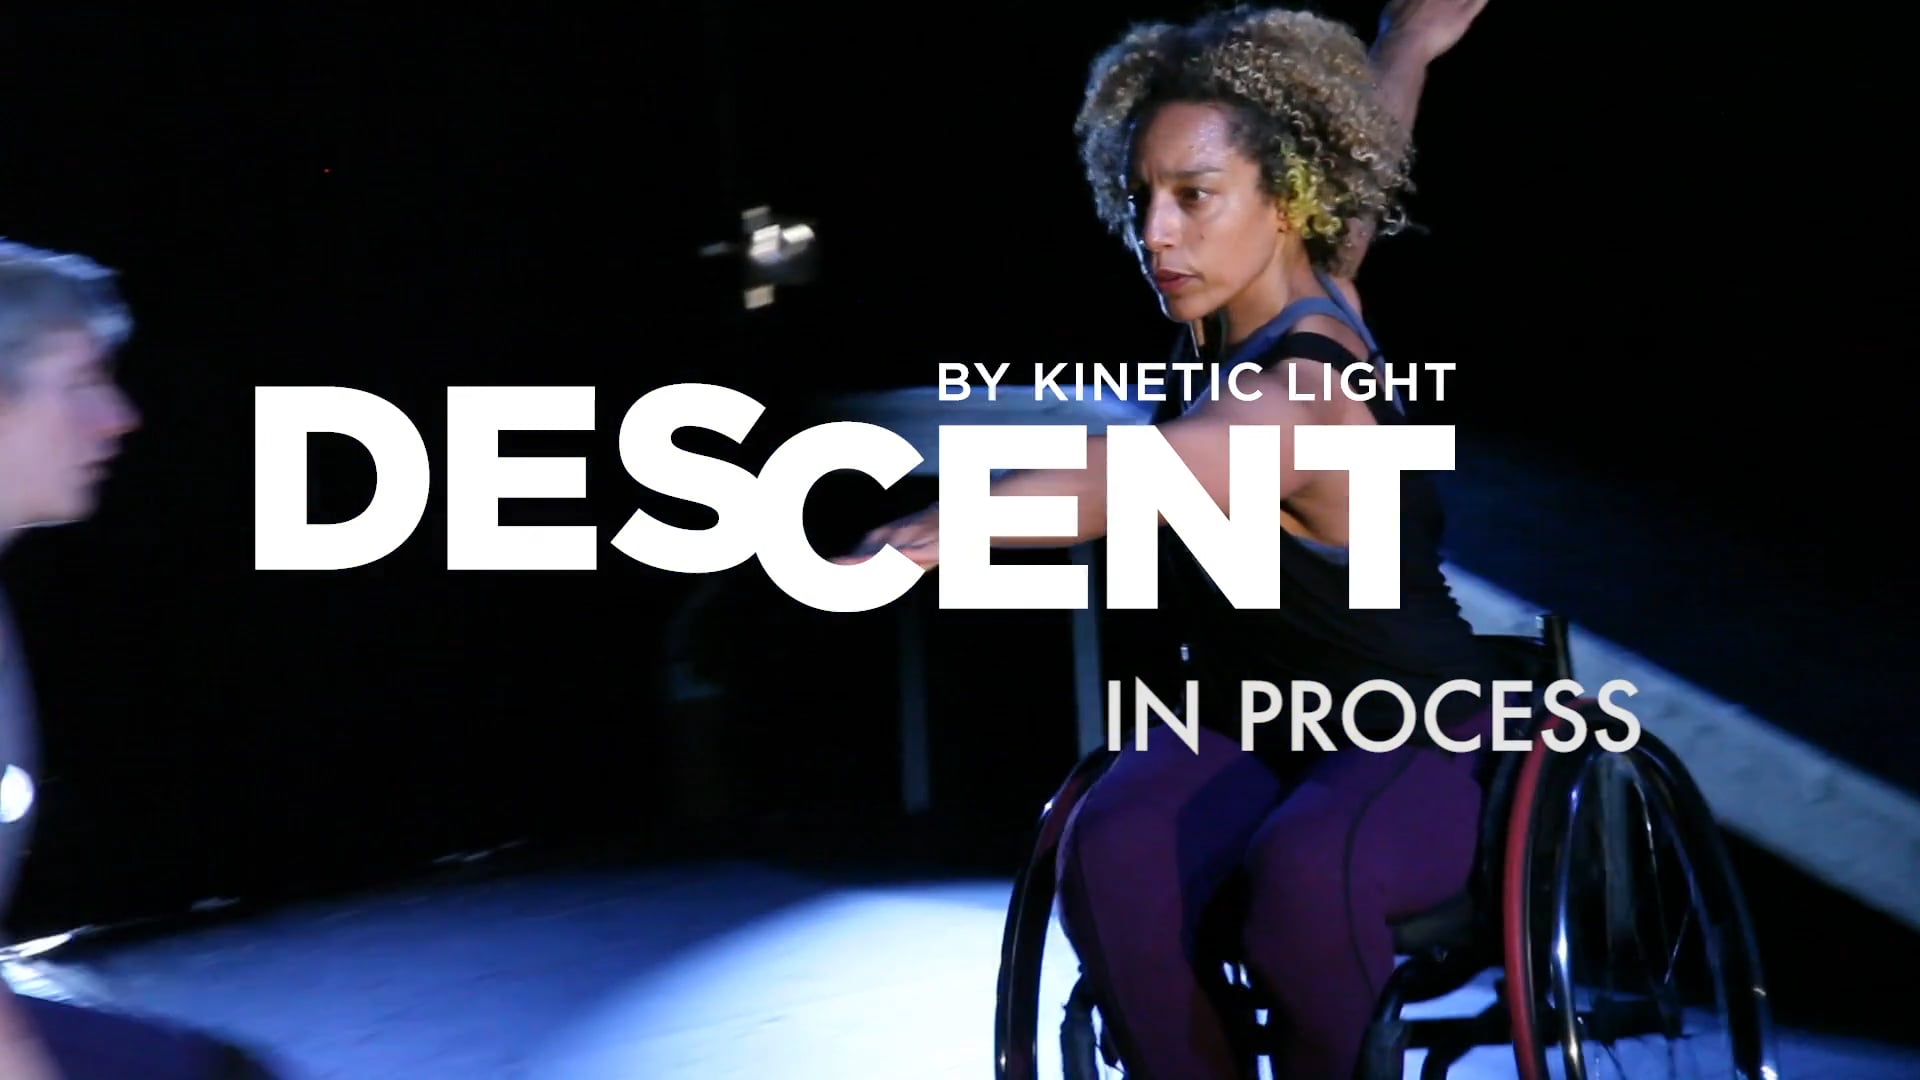 DESCENT by Kinetic Light - In Process